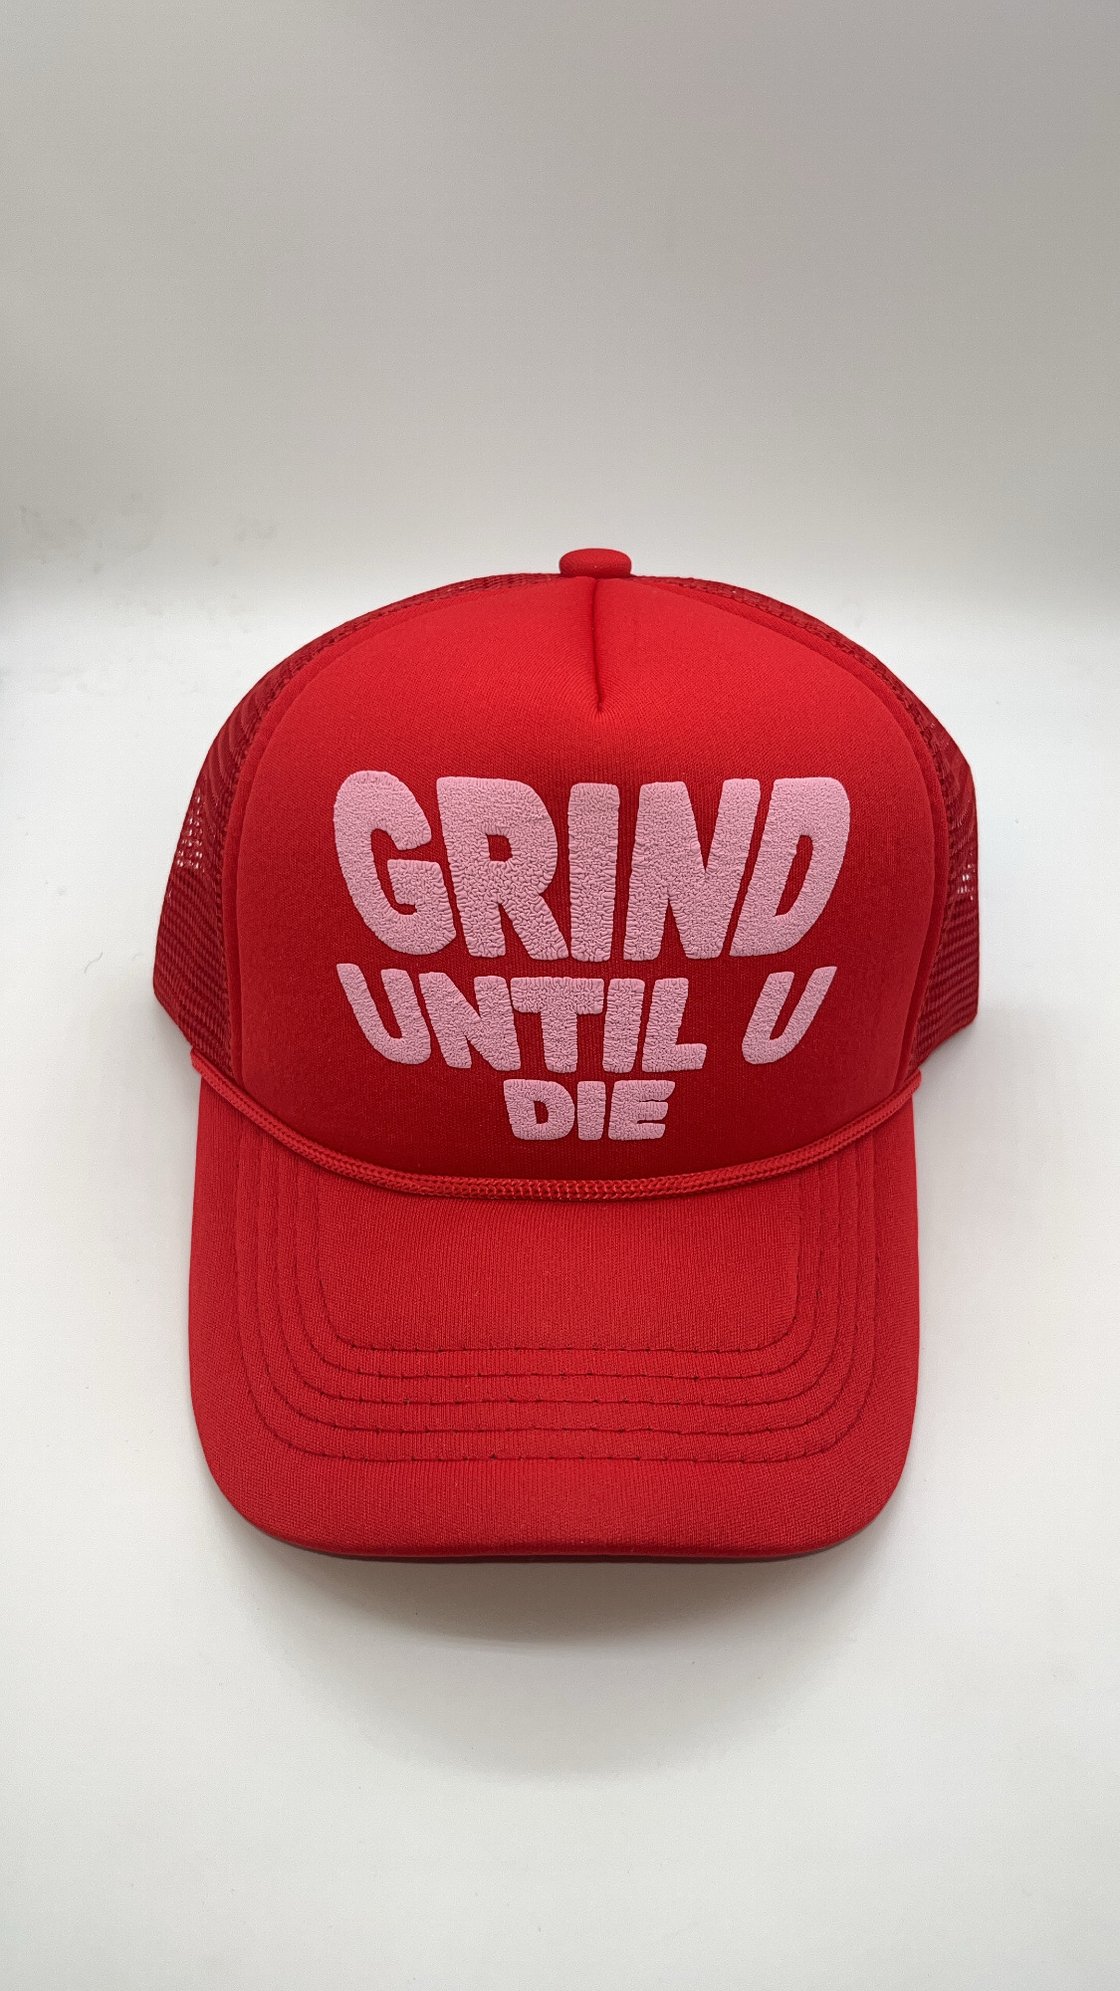 Image of GUUD "Solid" Trucker Hat 9